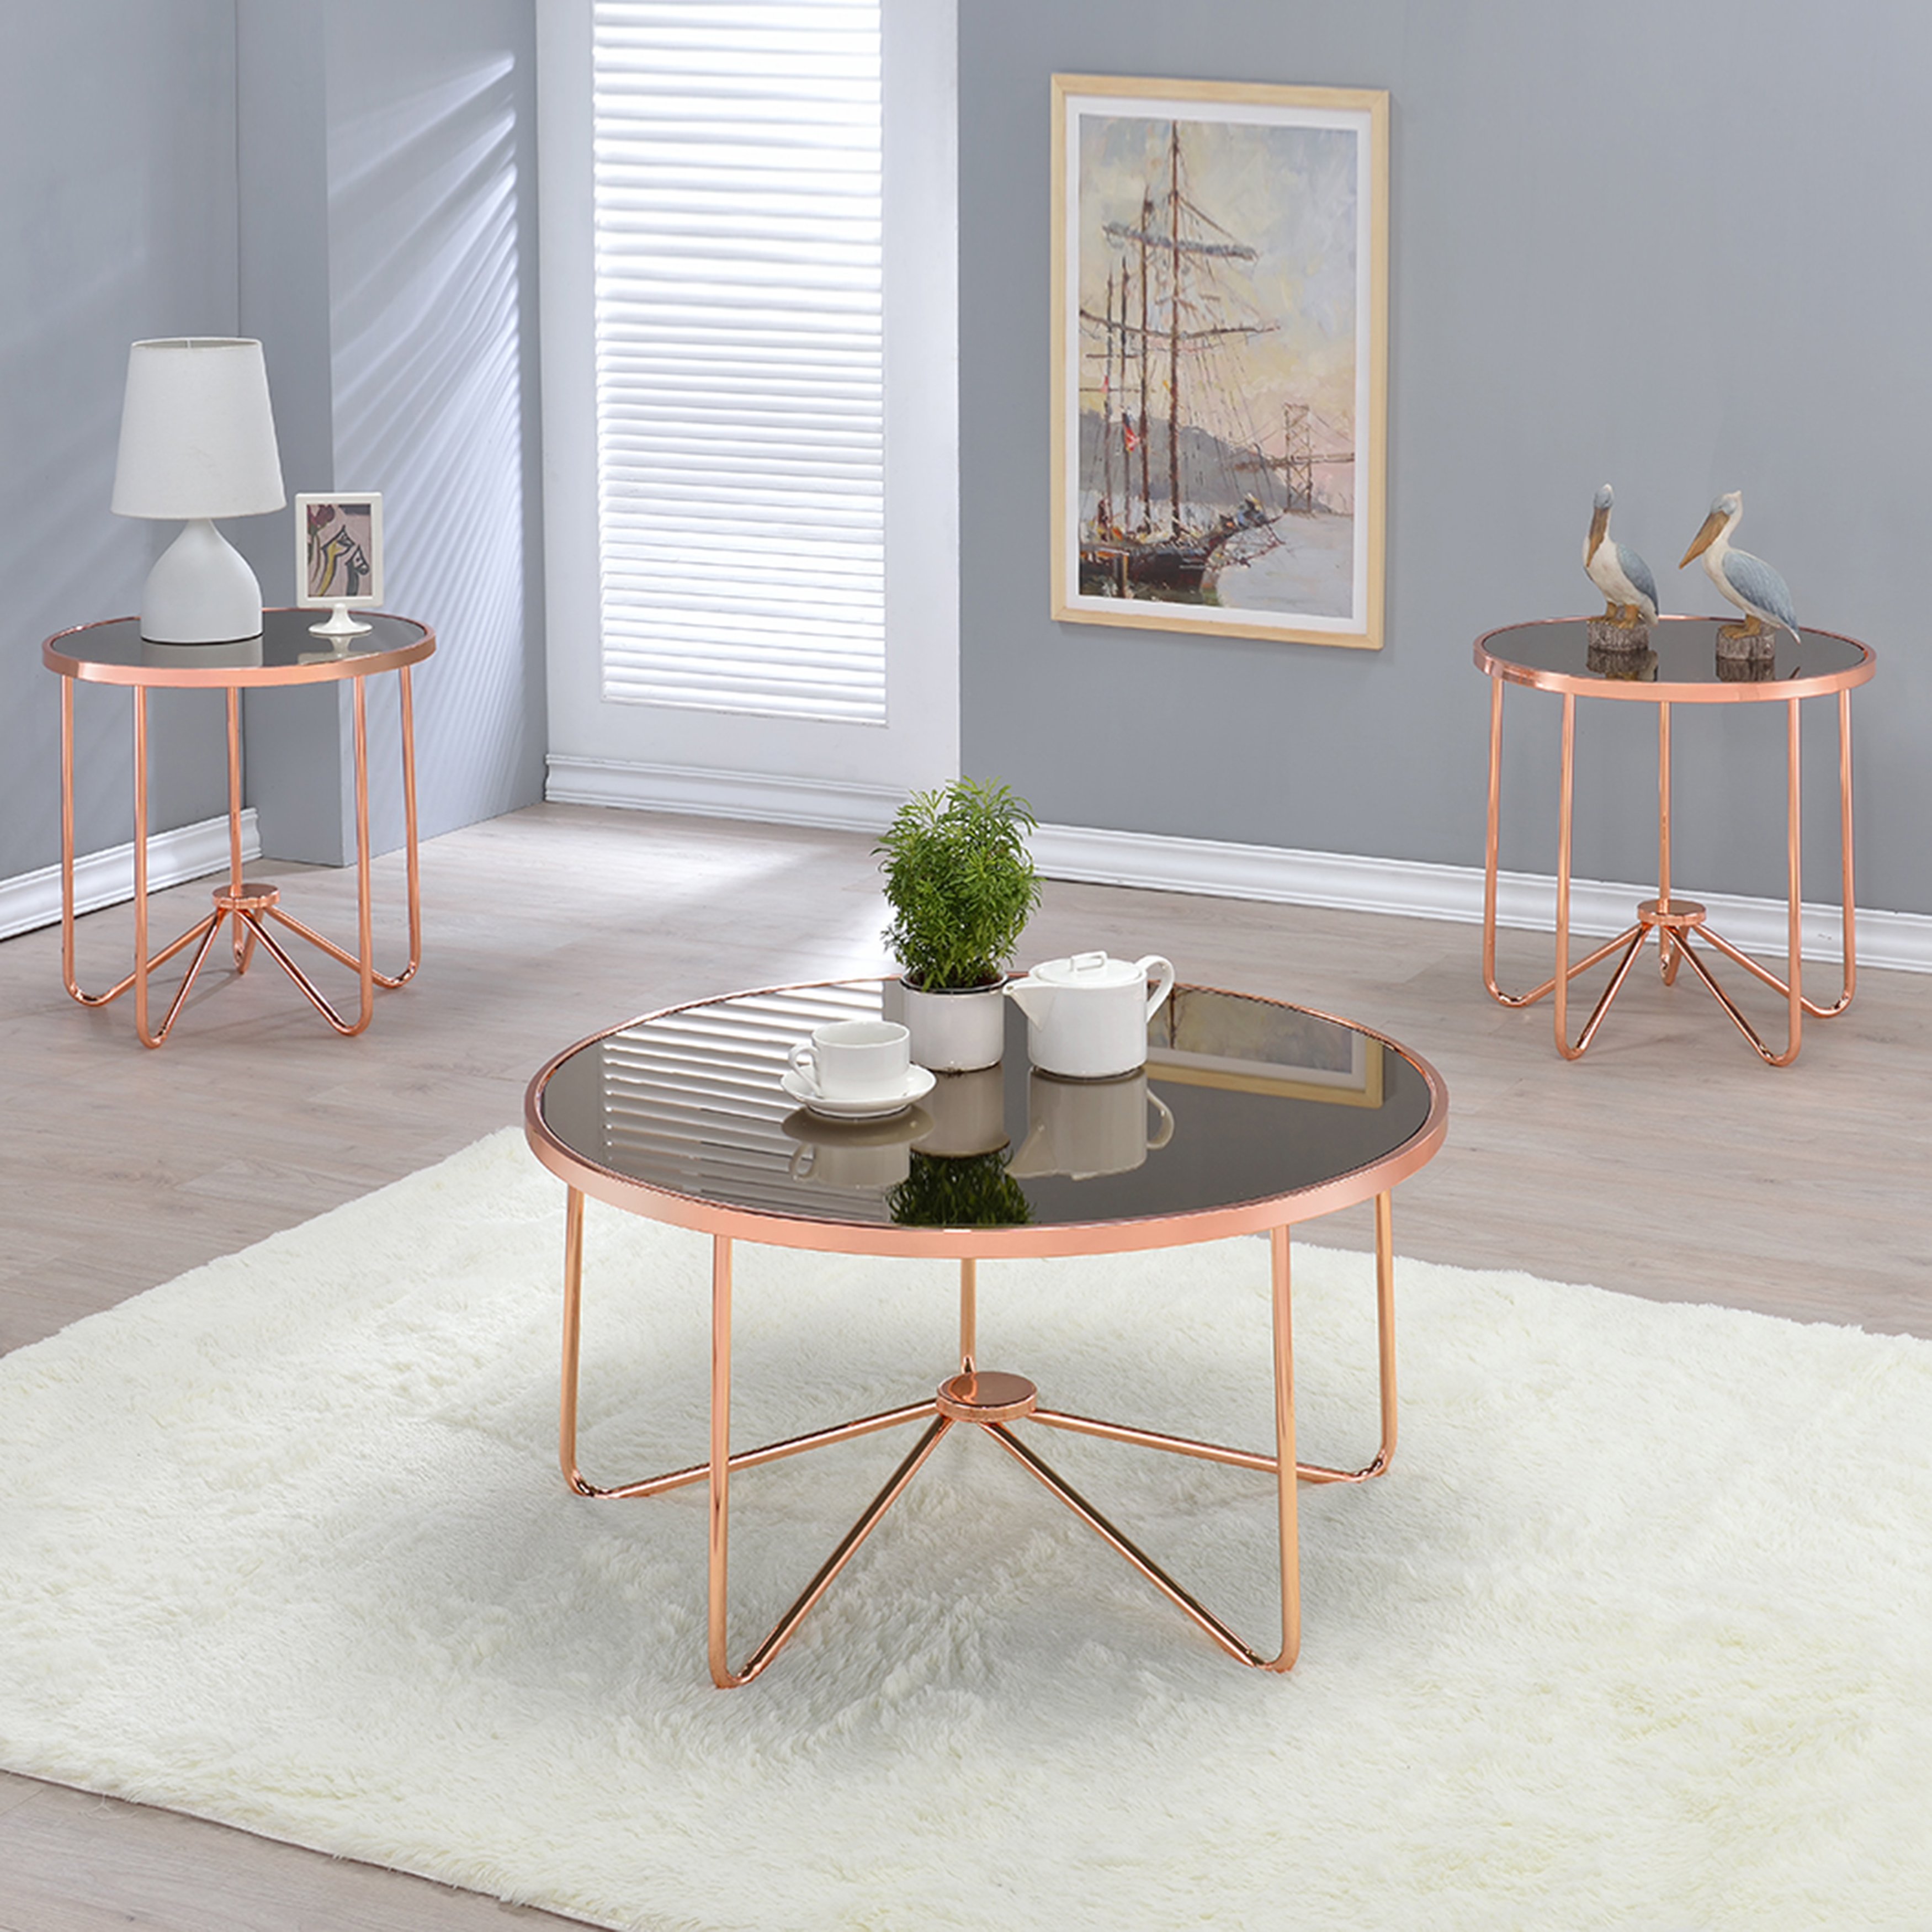 acme furniture alivia rose gold metal and glass accent tables table aamerica bunnings patio outdoor covers bench wire side target wall decoration items reclaimed wood entry lamps